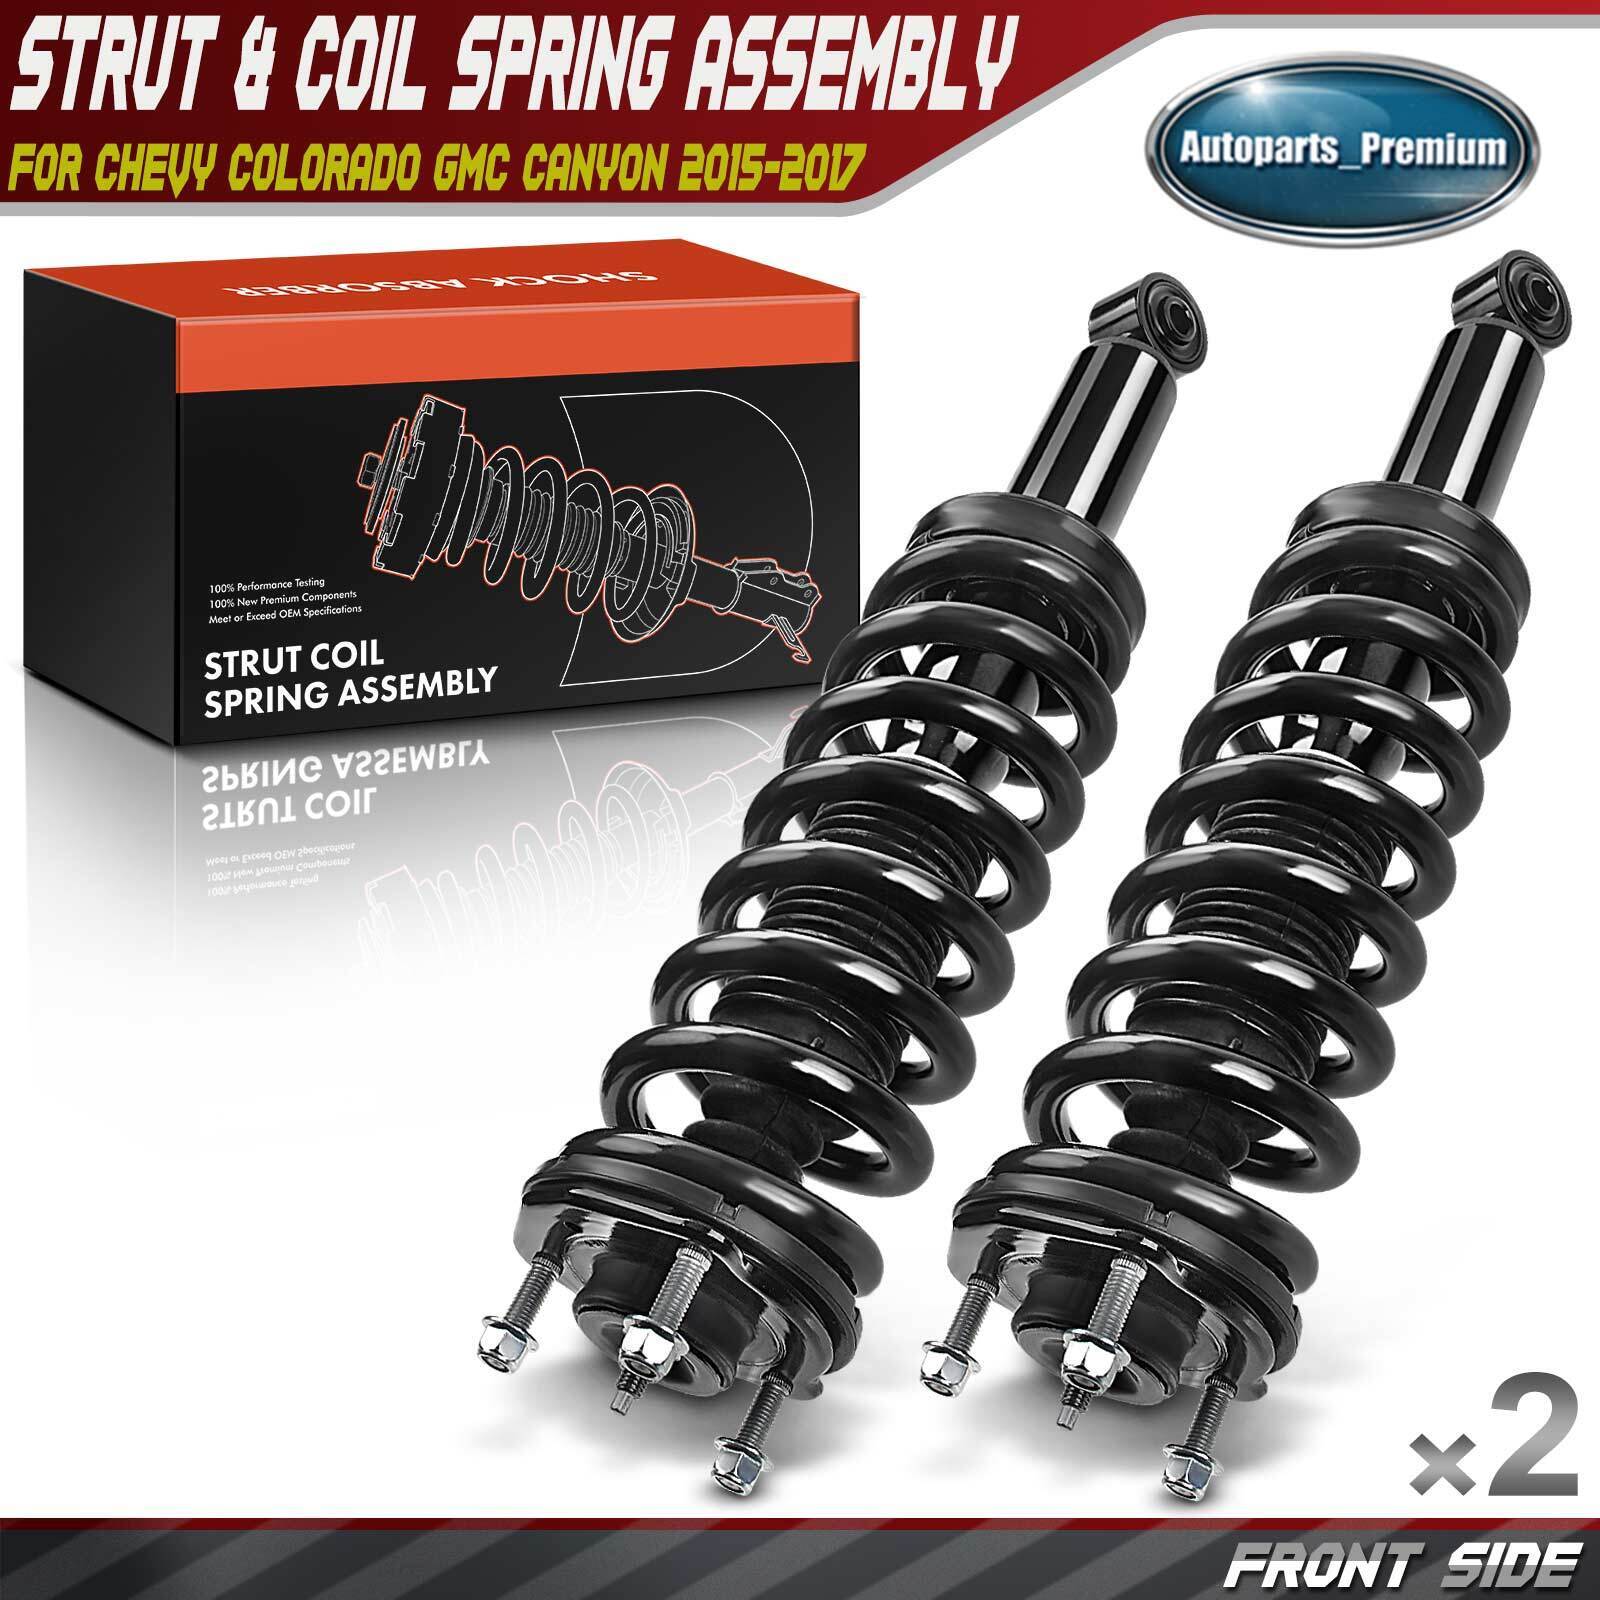 2x Front Complete Strut & Coil Spring Assembly for Chevy Colorado 2015-2017 GMC